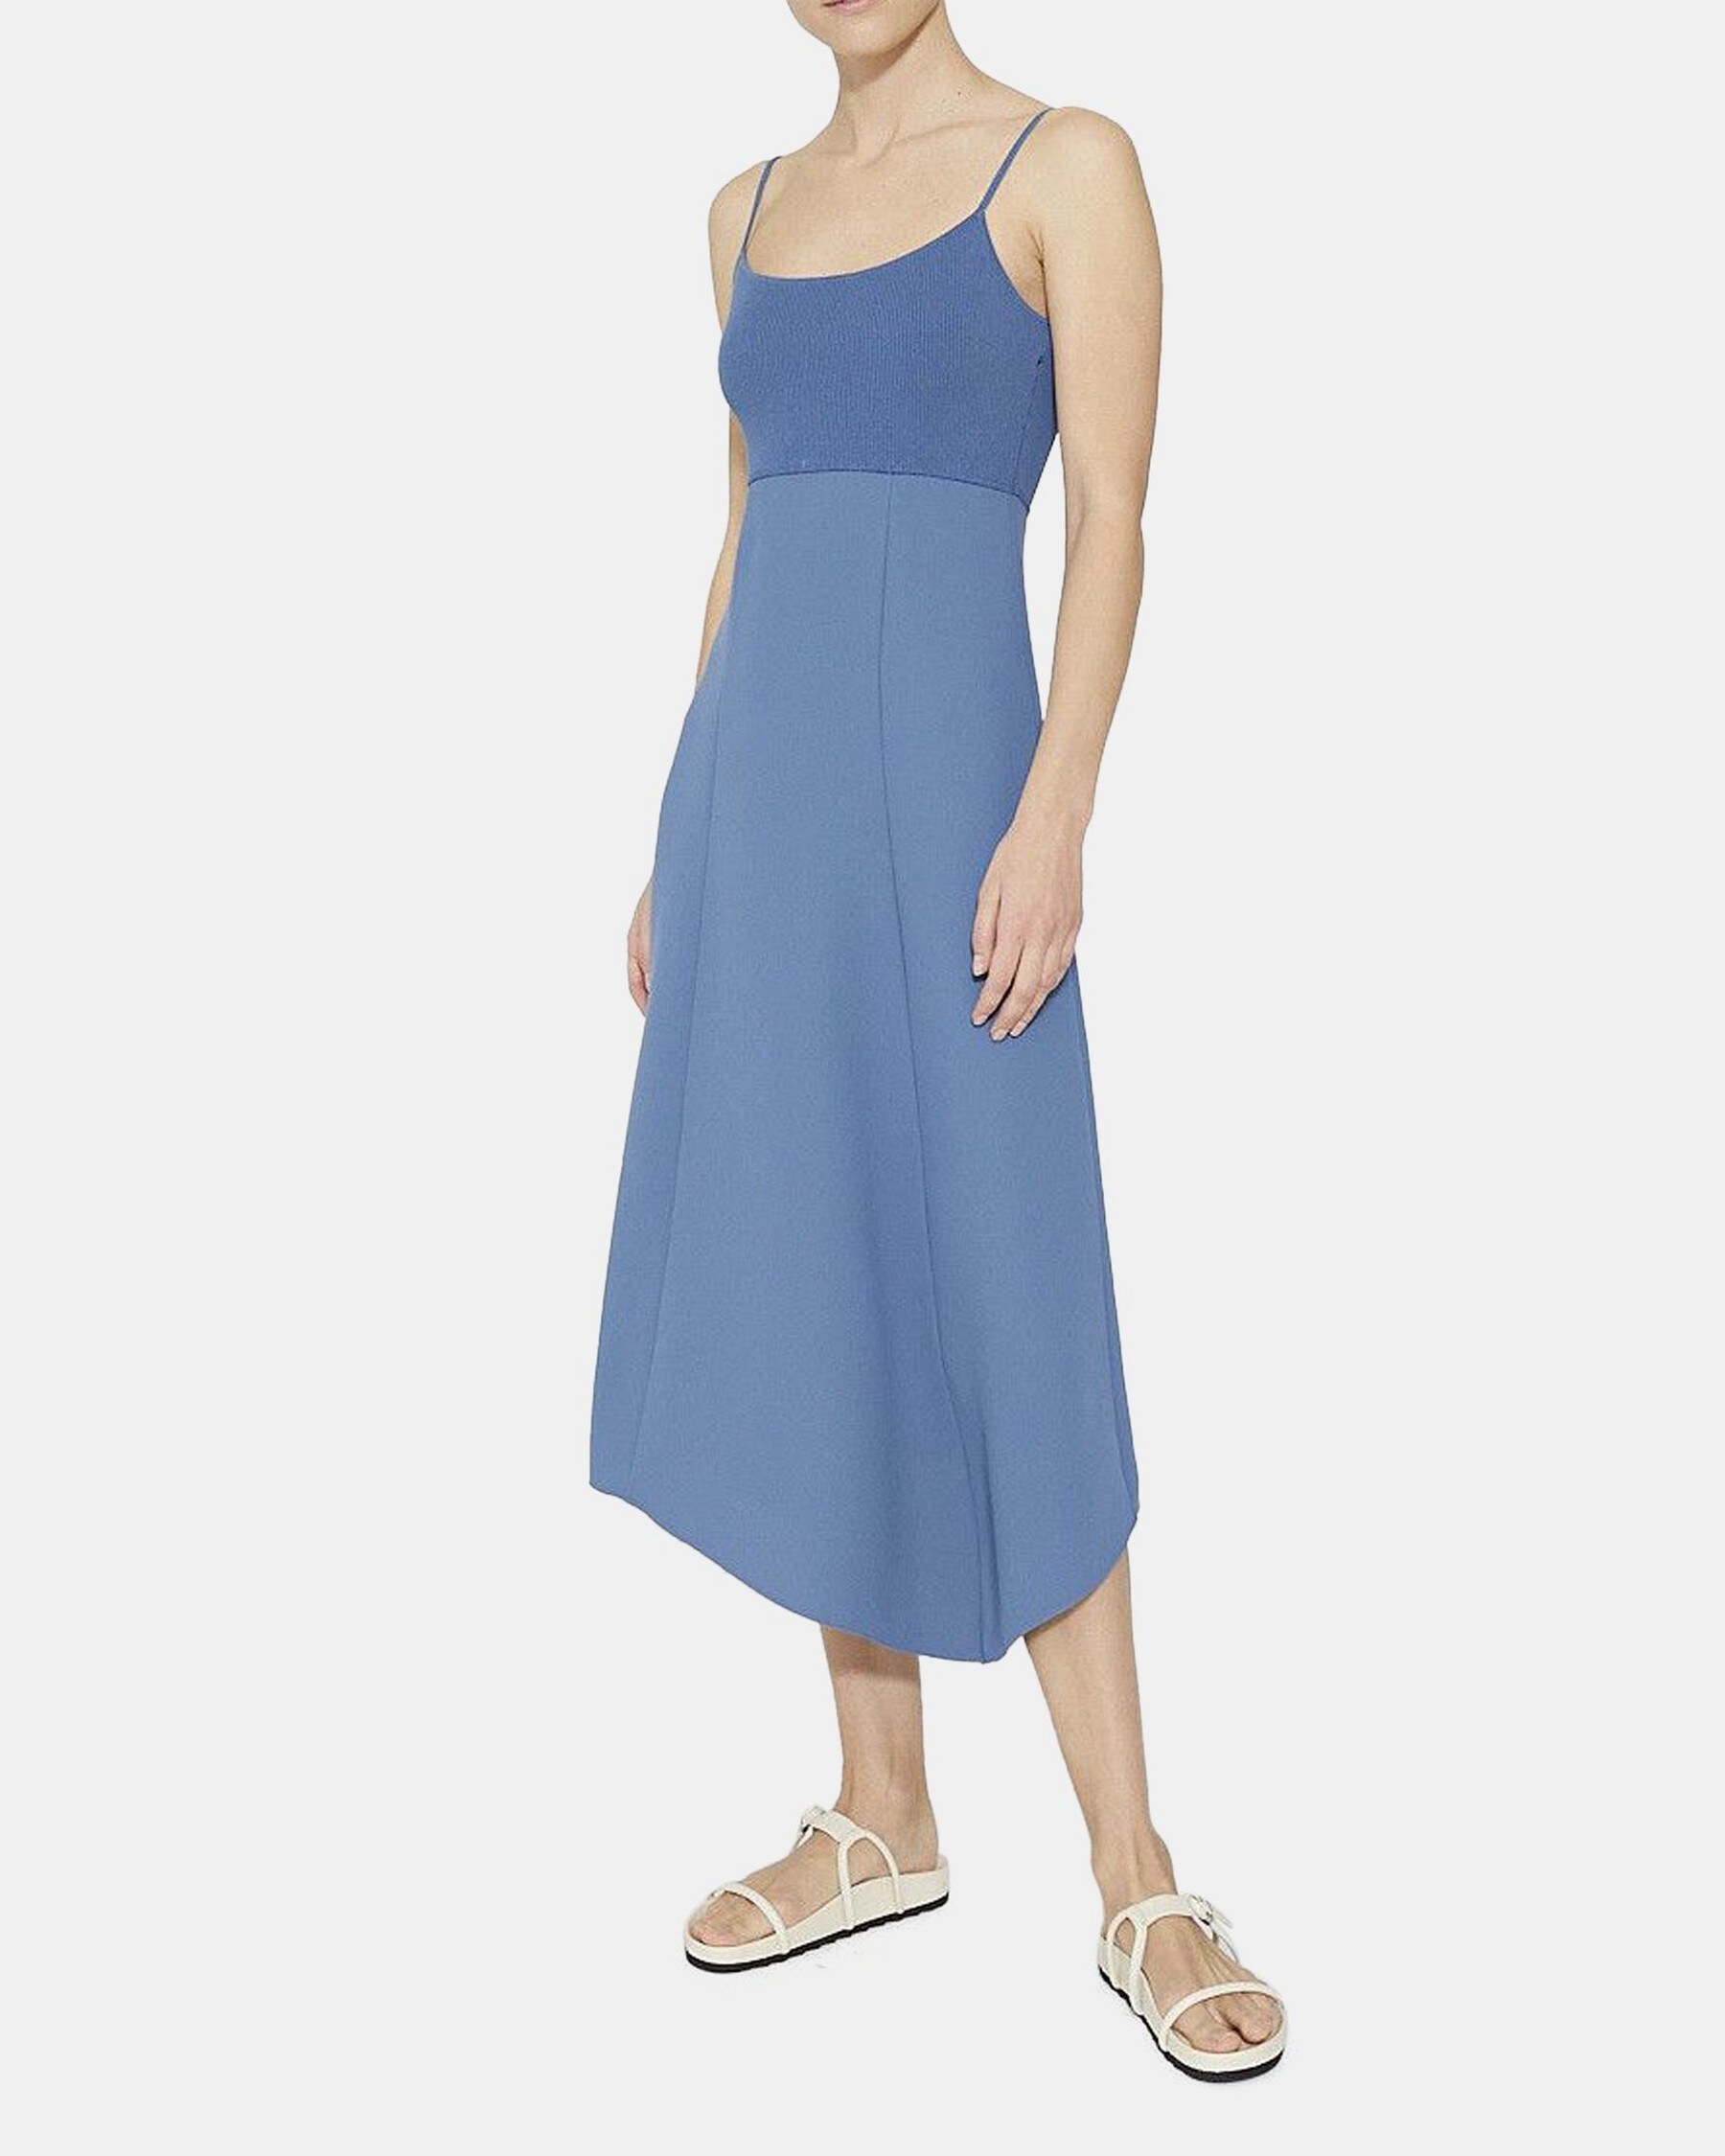 Theory Flared Slip Dress in Crepe